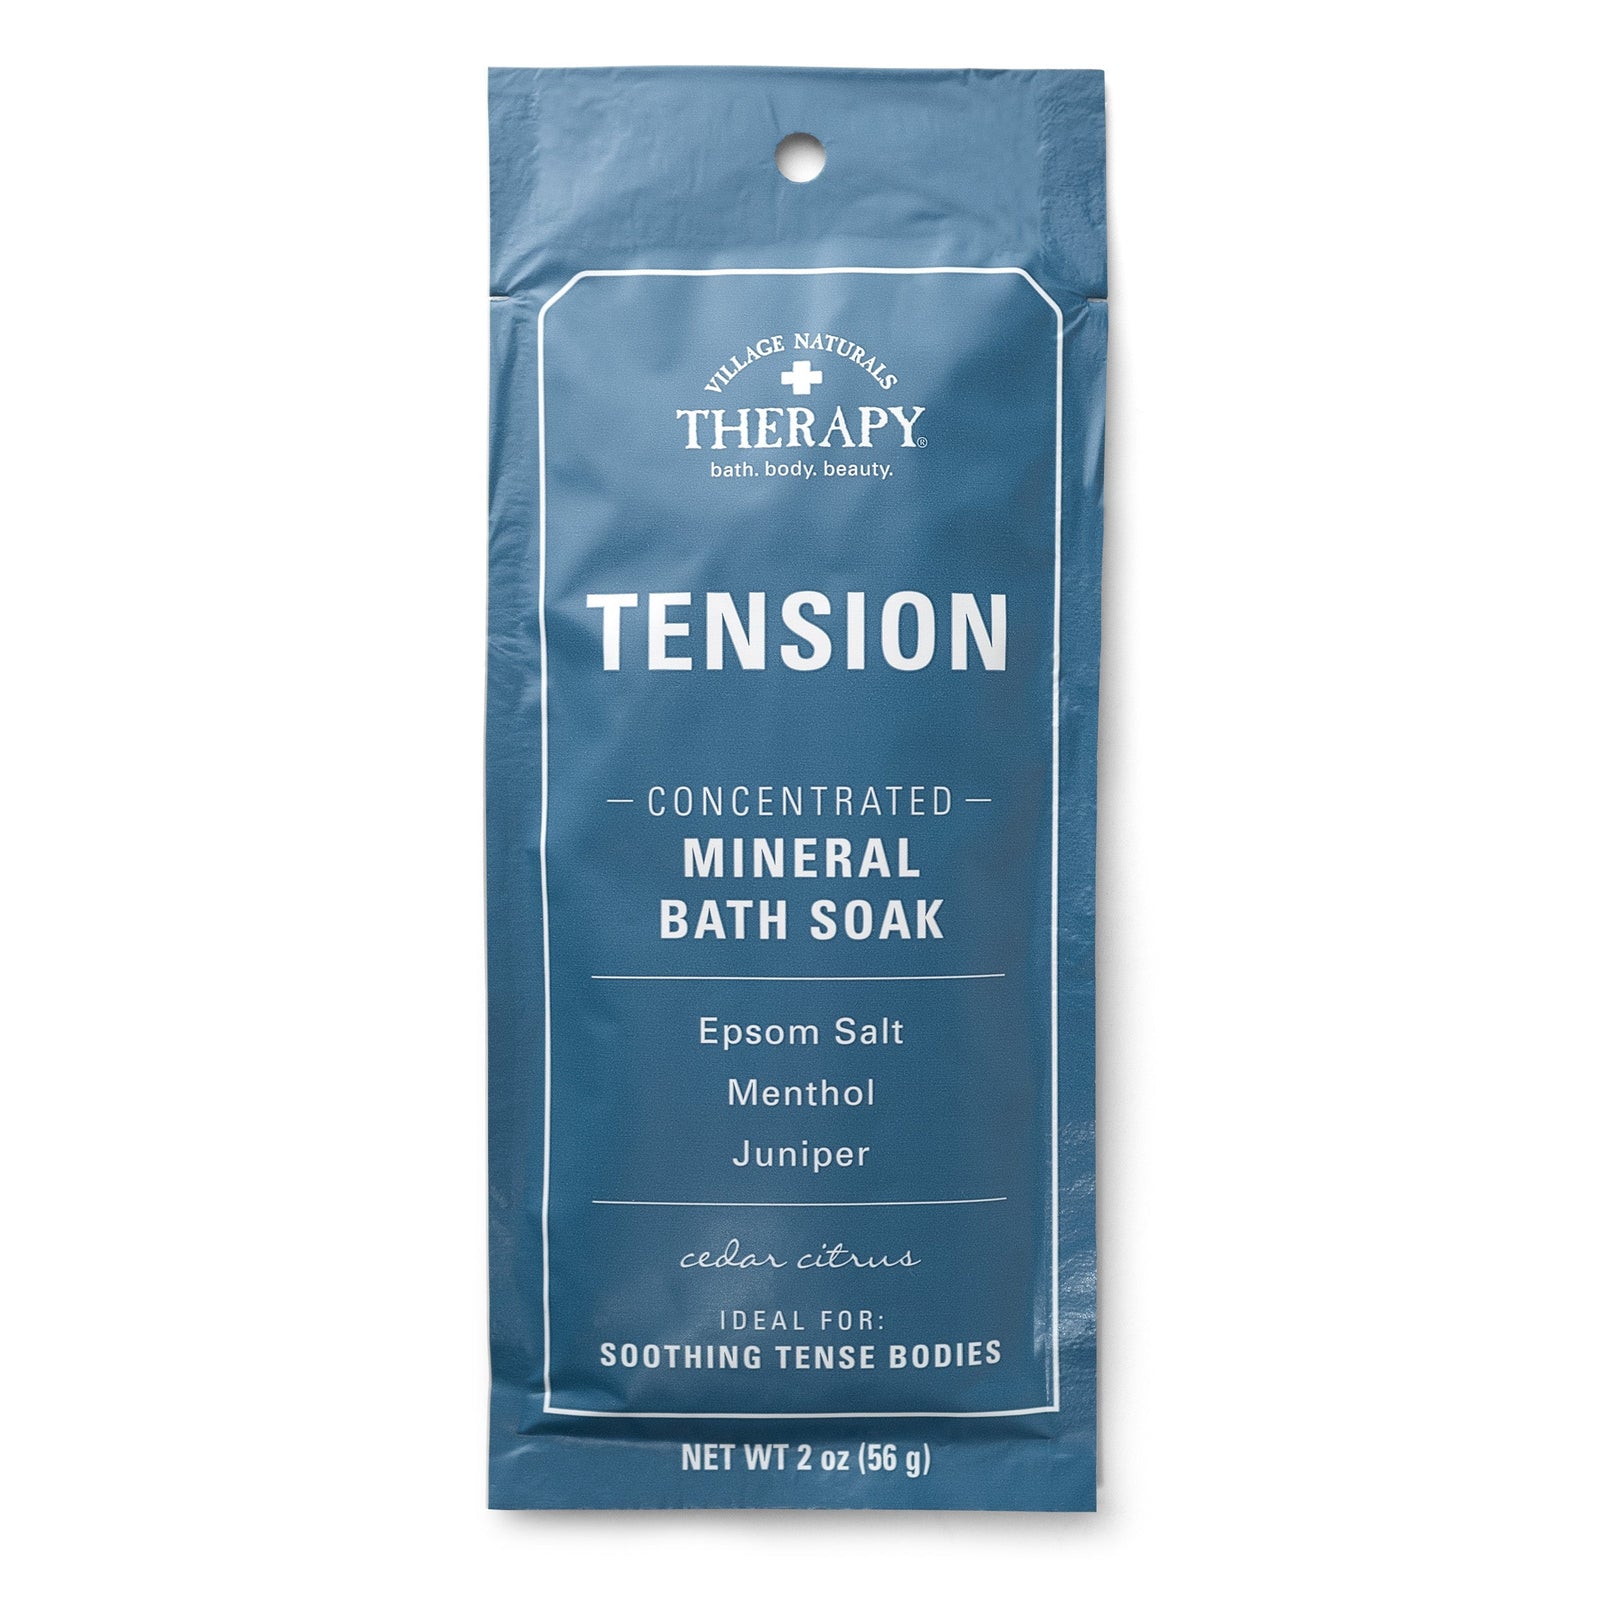 Village Naturals Therapy Tension Concentrated Mineral Bath Soak Packet